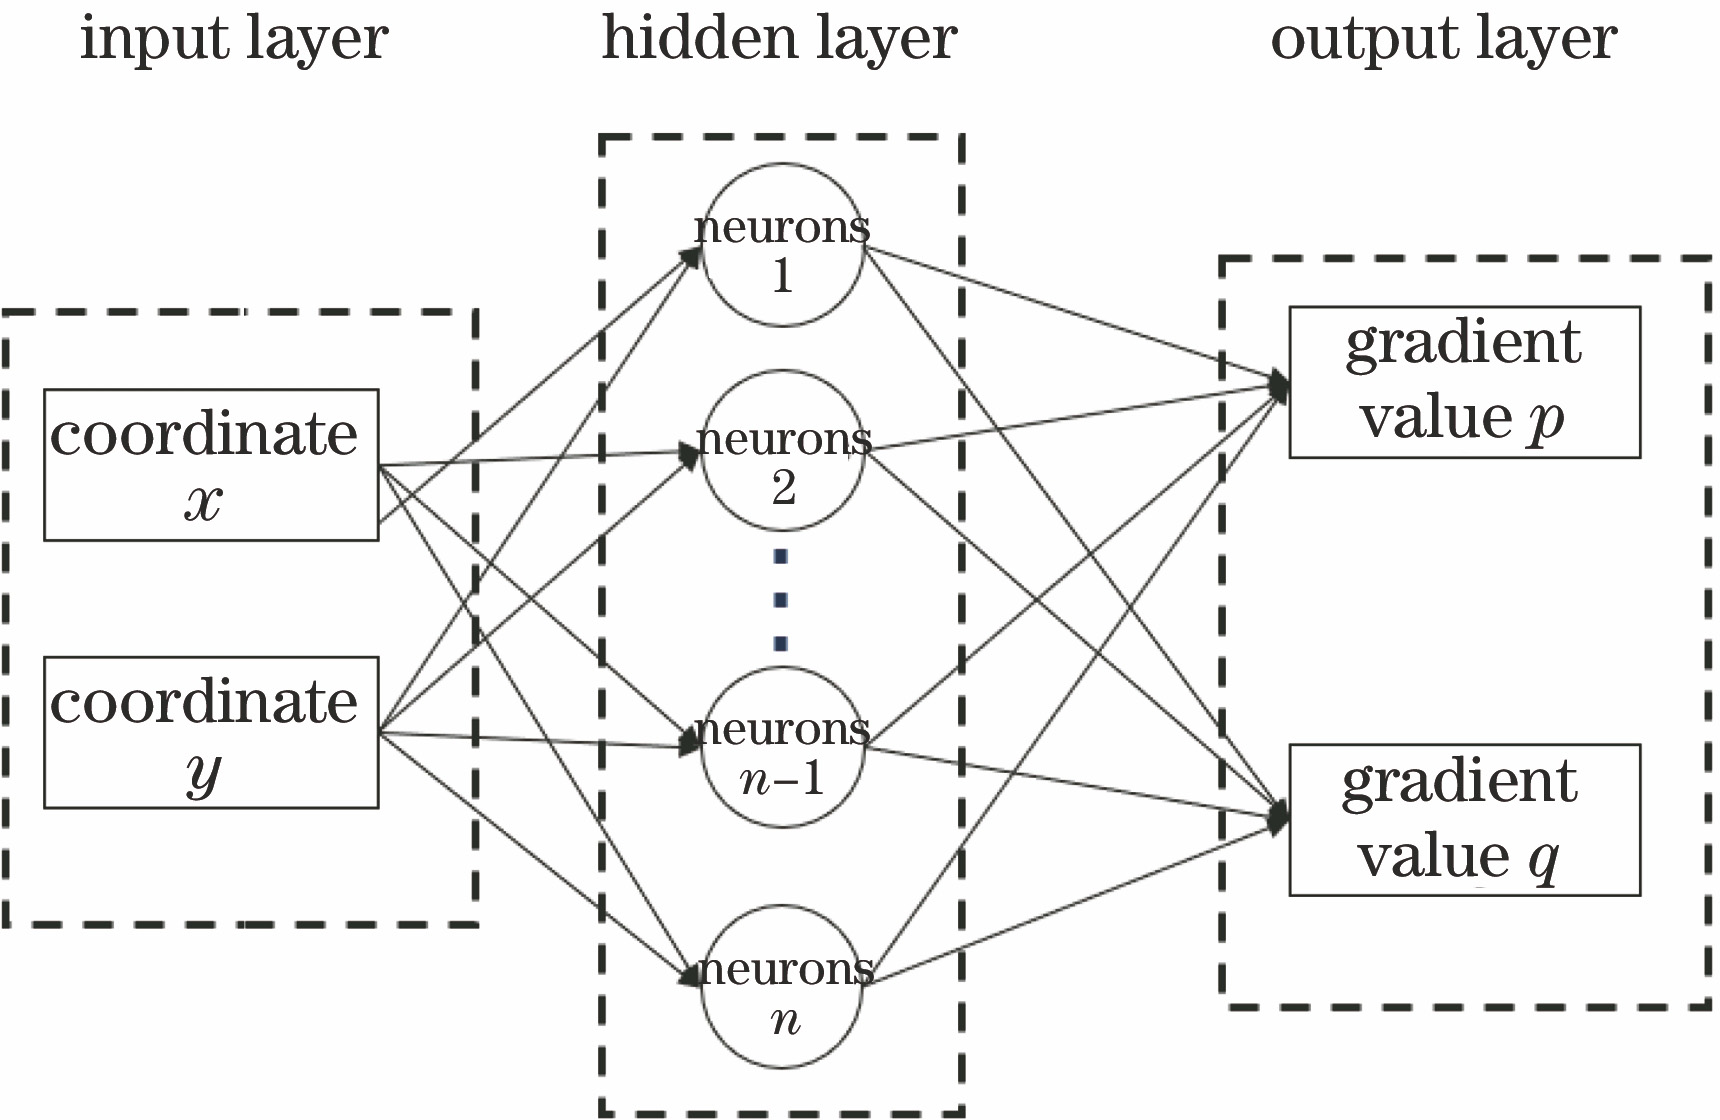 Topological structure of neural network